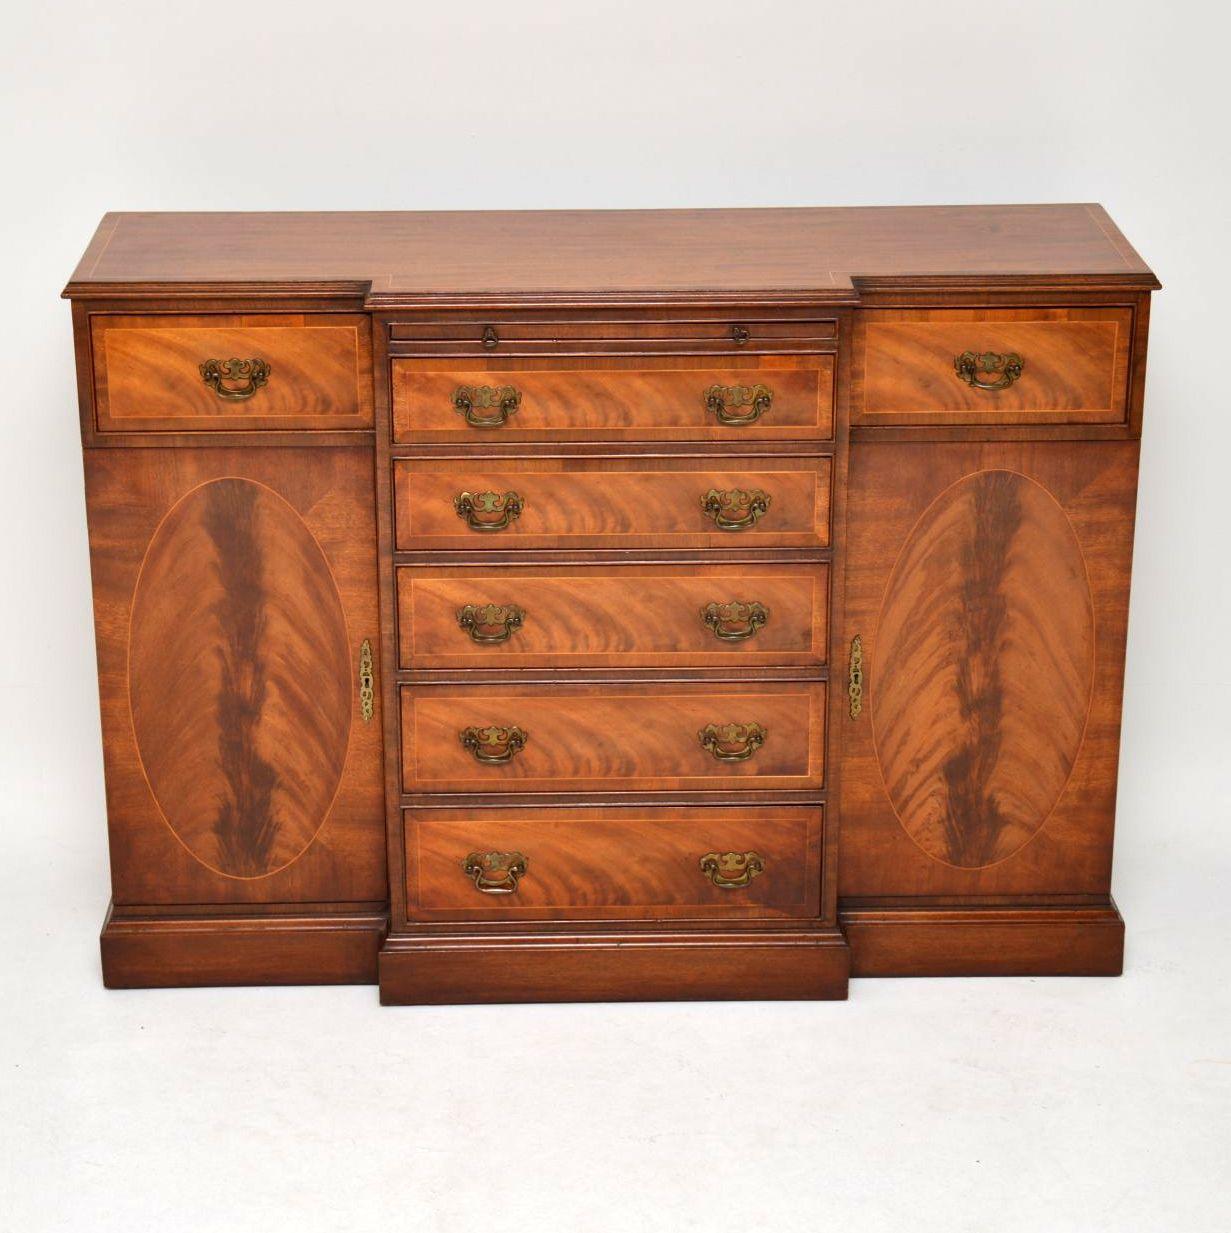 This is an antique Georgian style breakfront mahogany sideboard dating from around the 1950’s period & with some very fine features. The top has satinwood inlay with cross banding outside of that. The inlays & crossbandings are repeated on all the